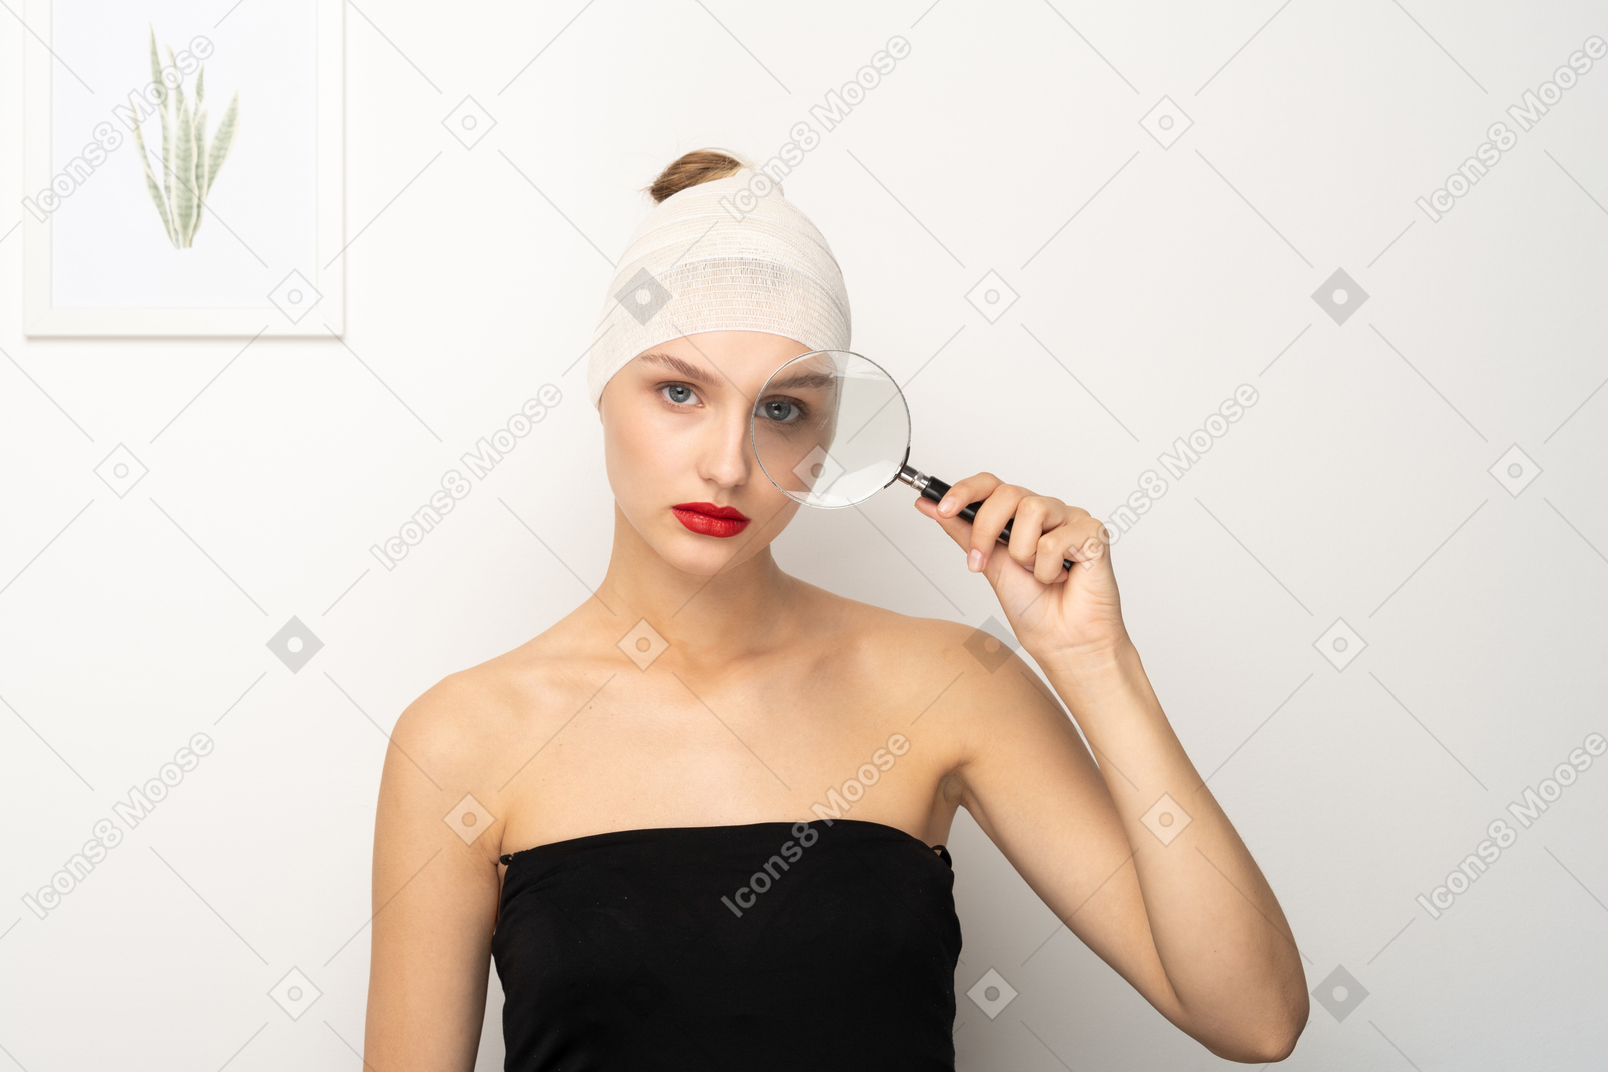 Young woman looking through magnifying glass